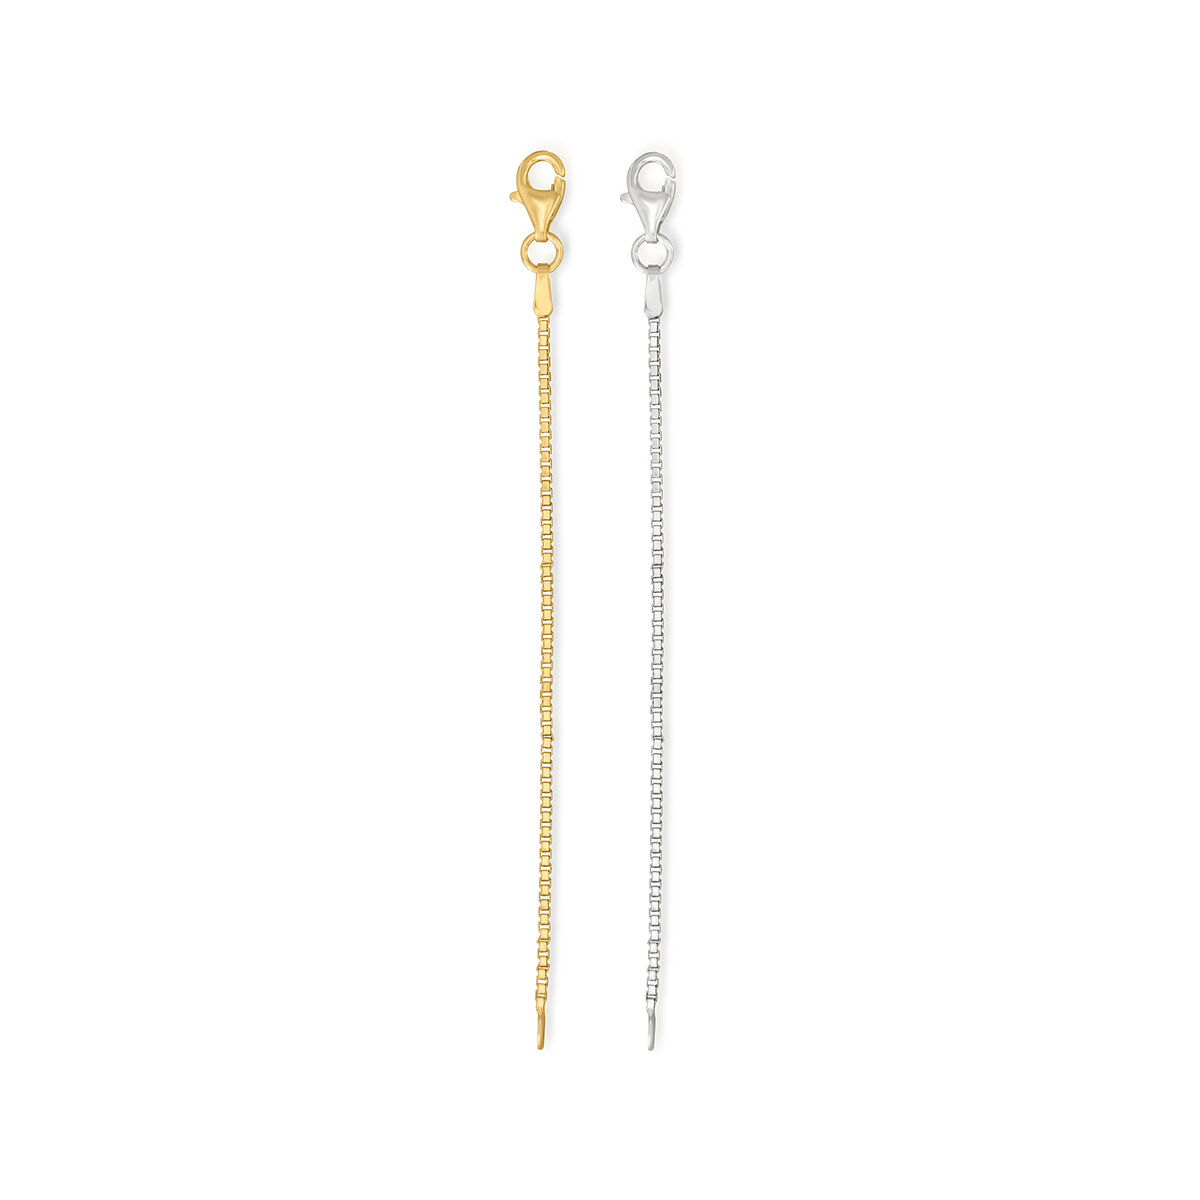 Sterling Silver and 18kt Gold Over Sterling Accessory Set: Two 3 Box-Chain  Necklace Extenders